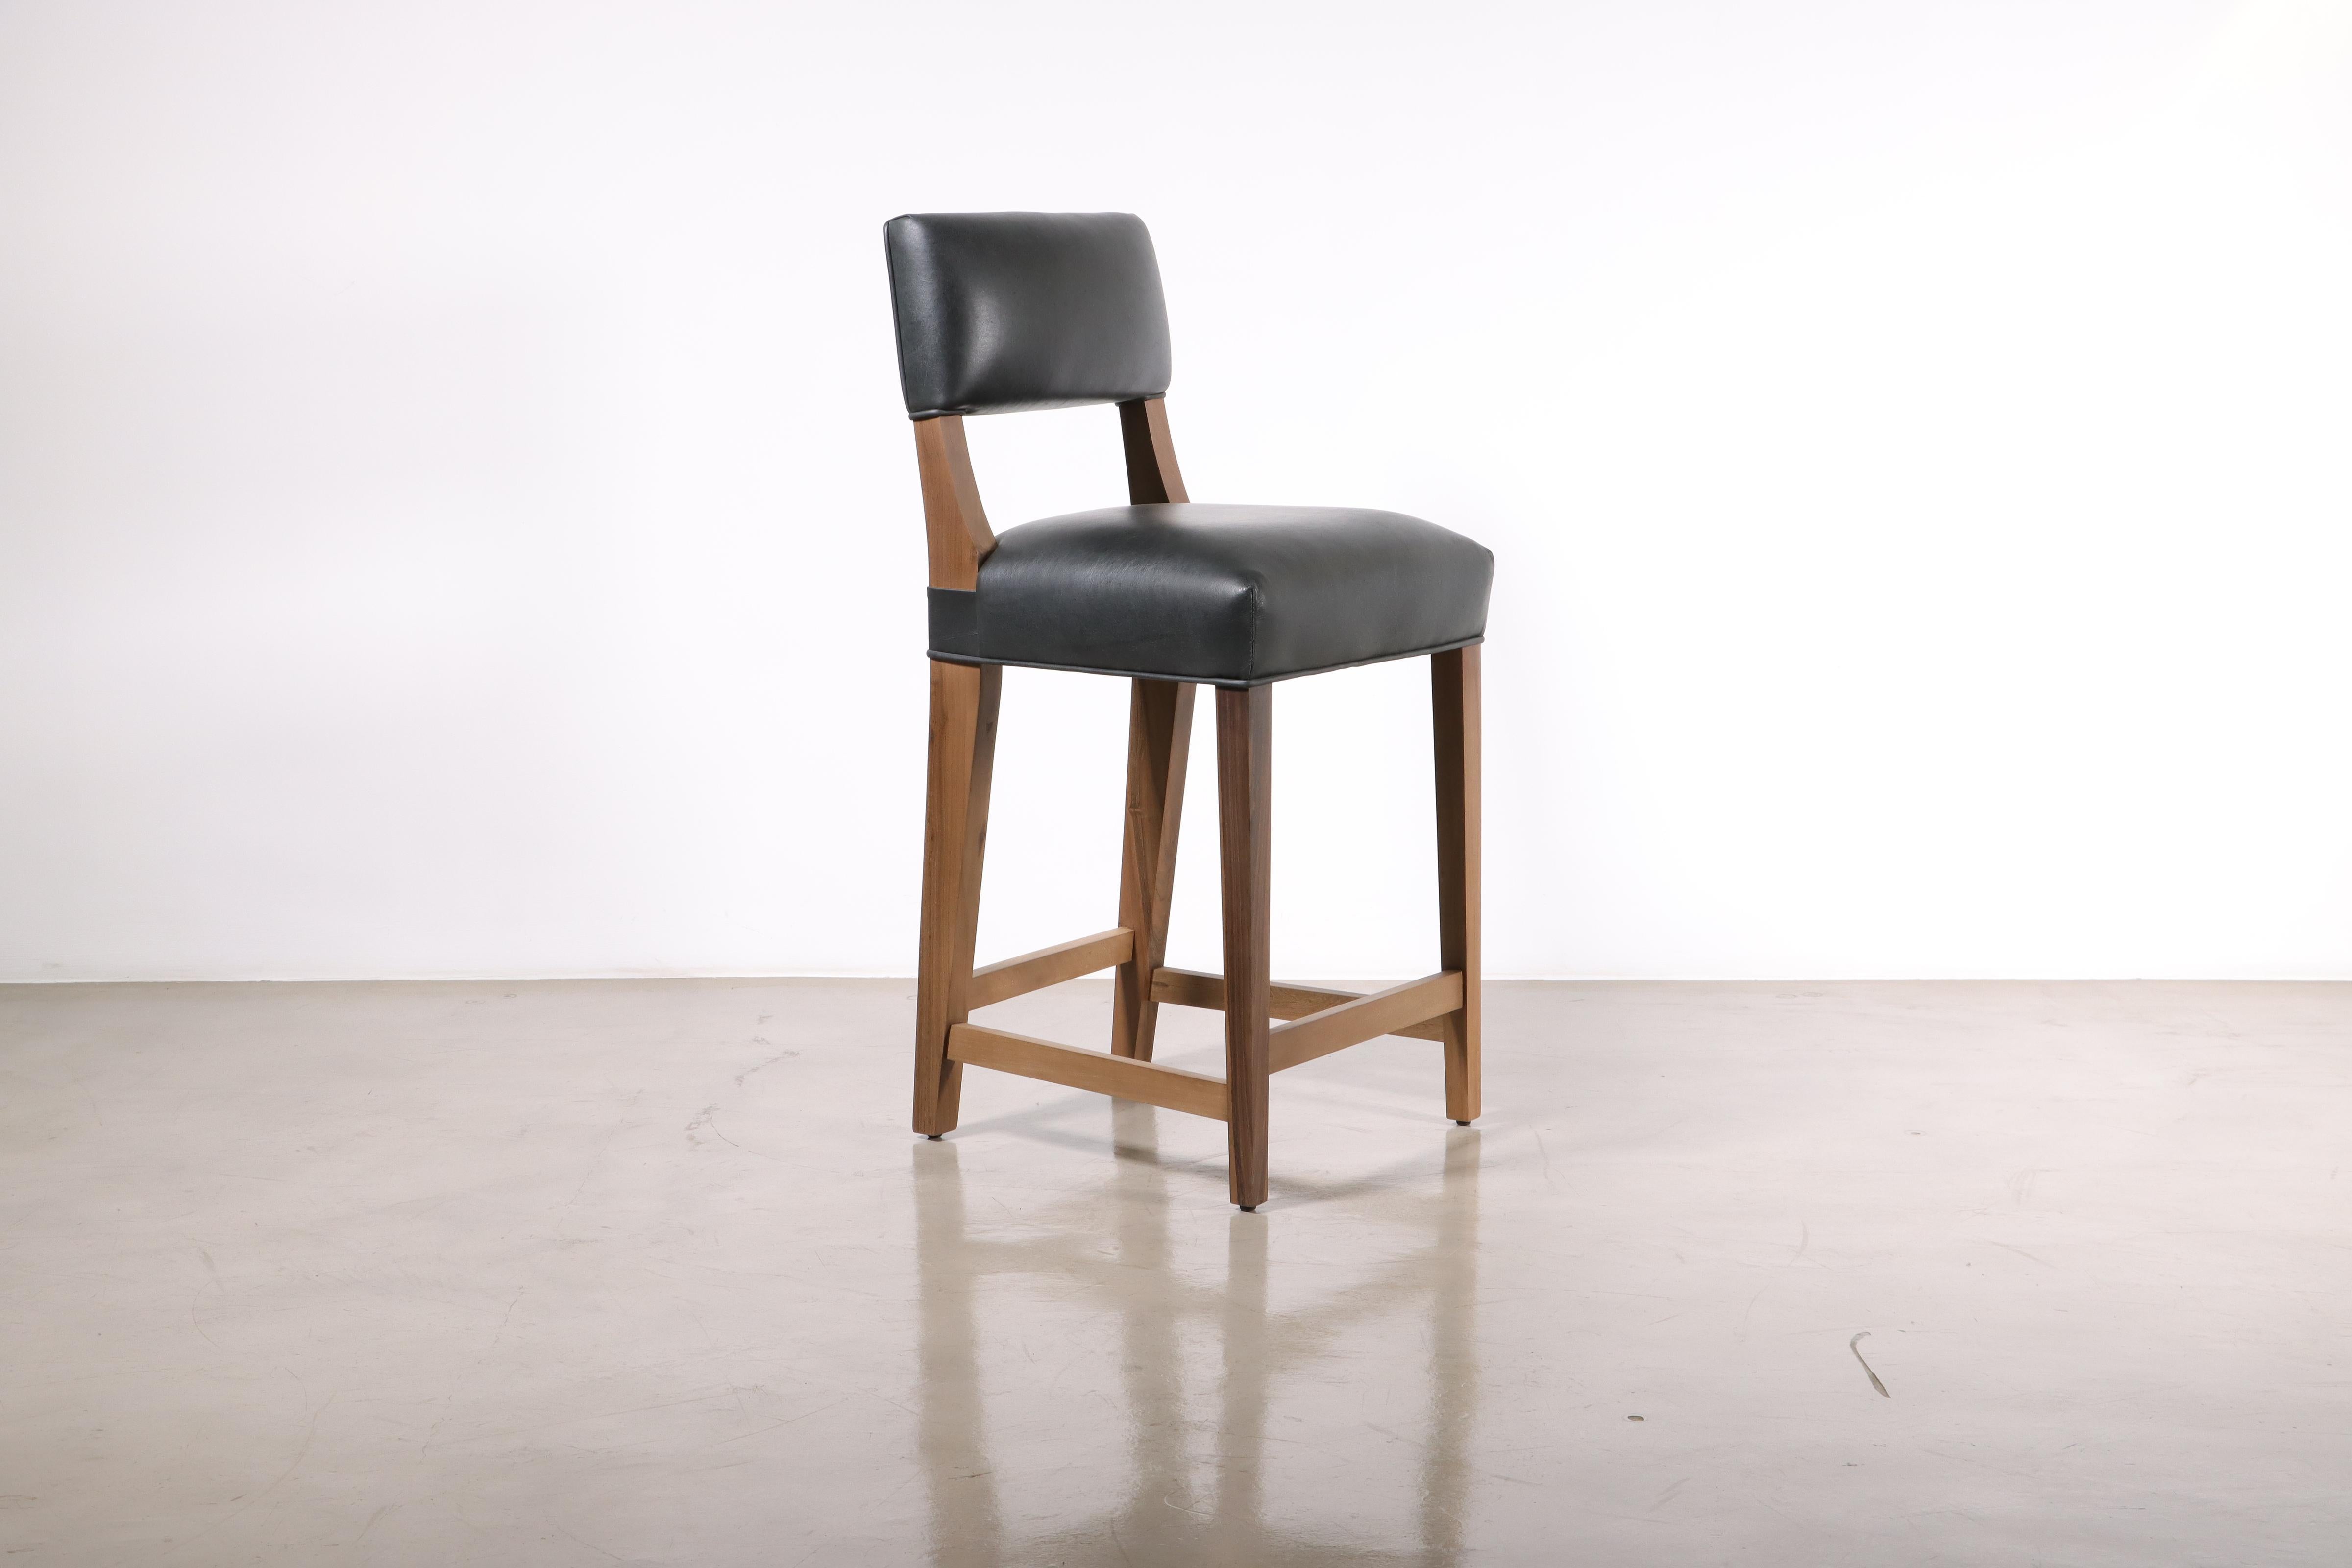 Costantini prides itself in using the hardest and most beautiful hardwoods in the construction of its line of seating. Shown in Argentine Rosewood, the Bruno Stool has a relatively low, angular back leg that alludes the chair of the same name.